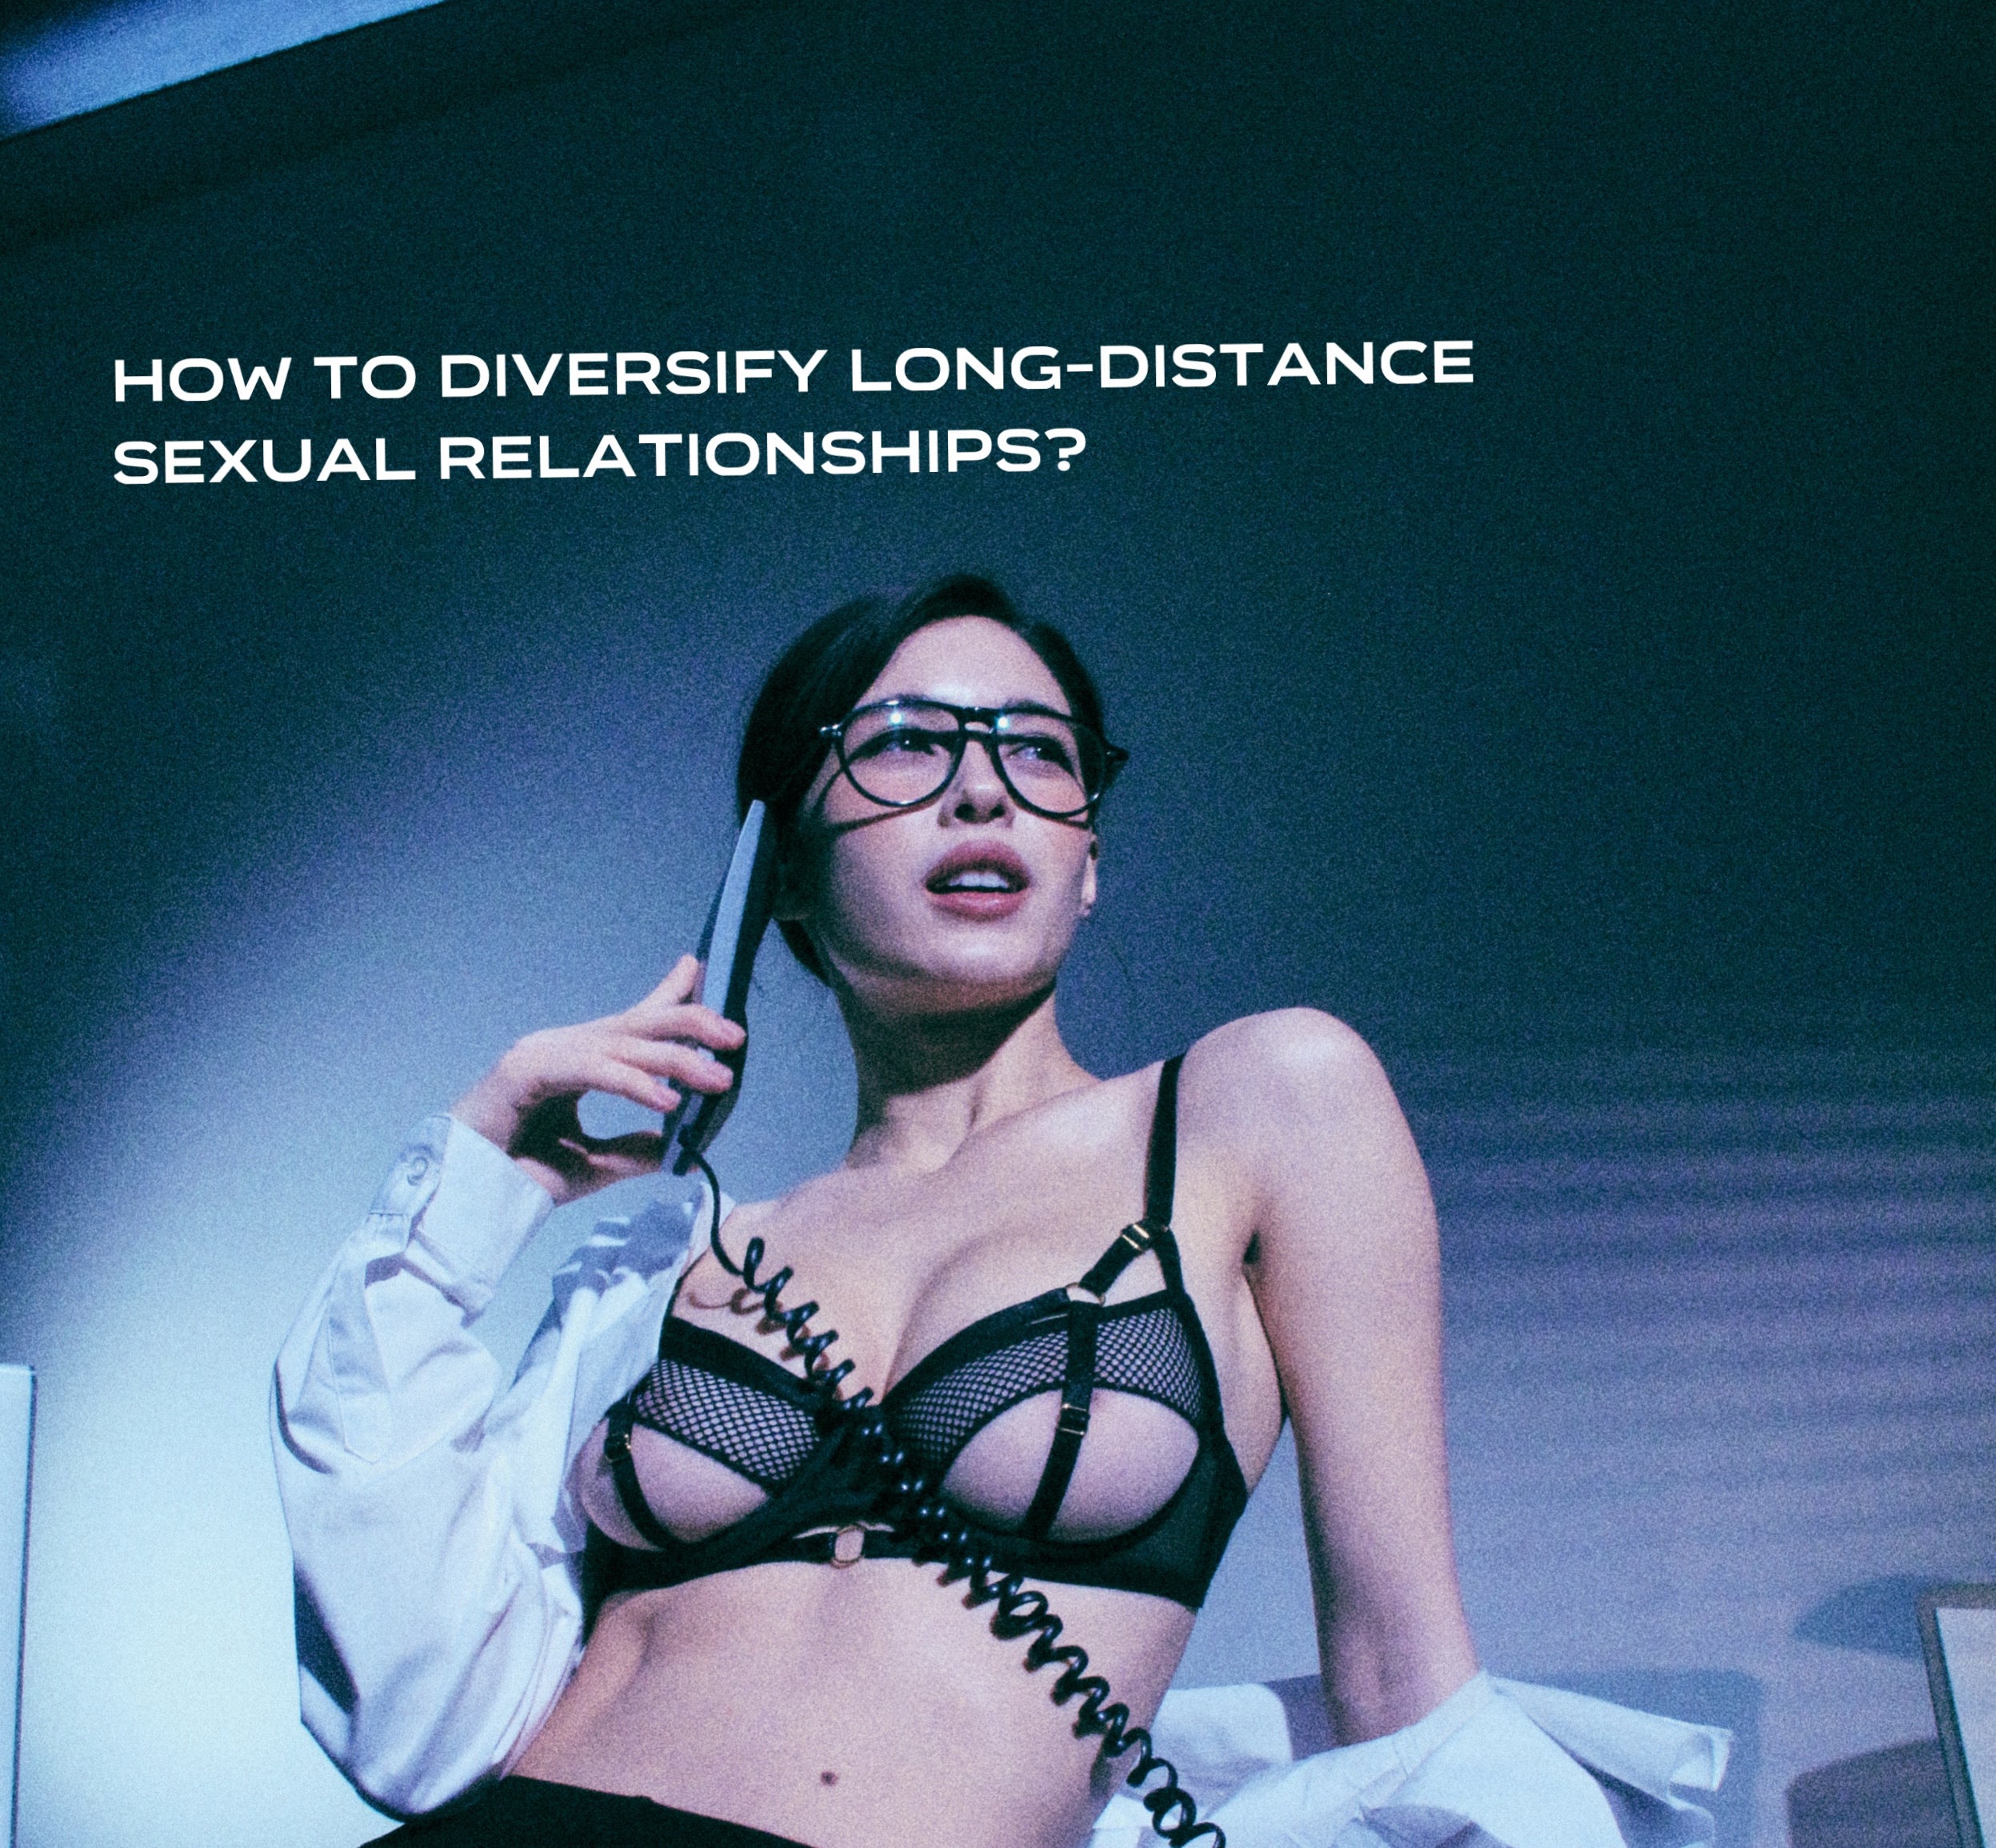 HOW TO DIVERSIFY LONG-DISTANCE SEXUAL RELATIONSHIPS?